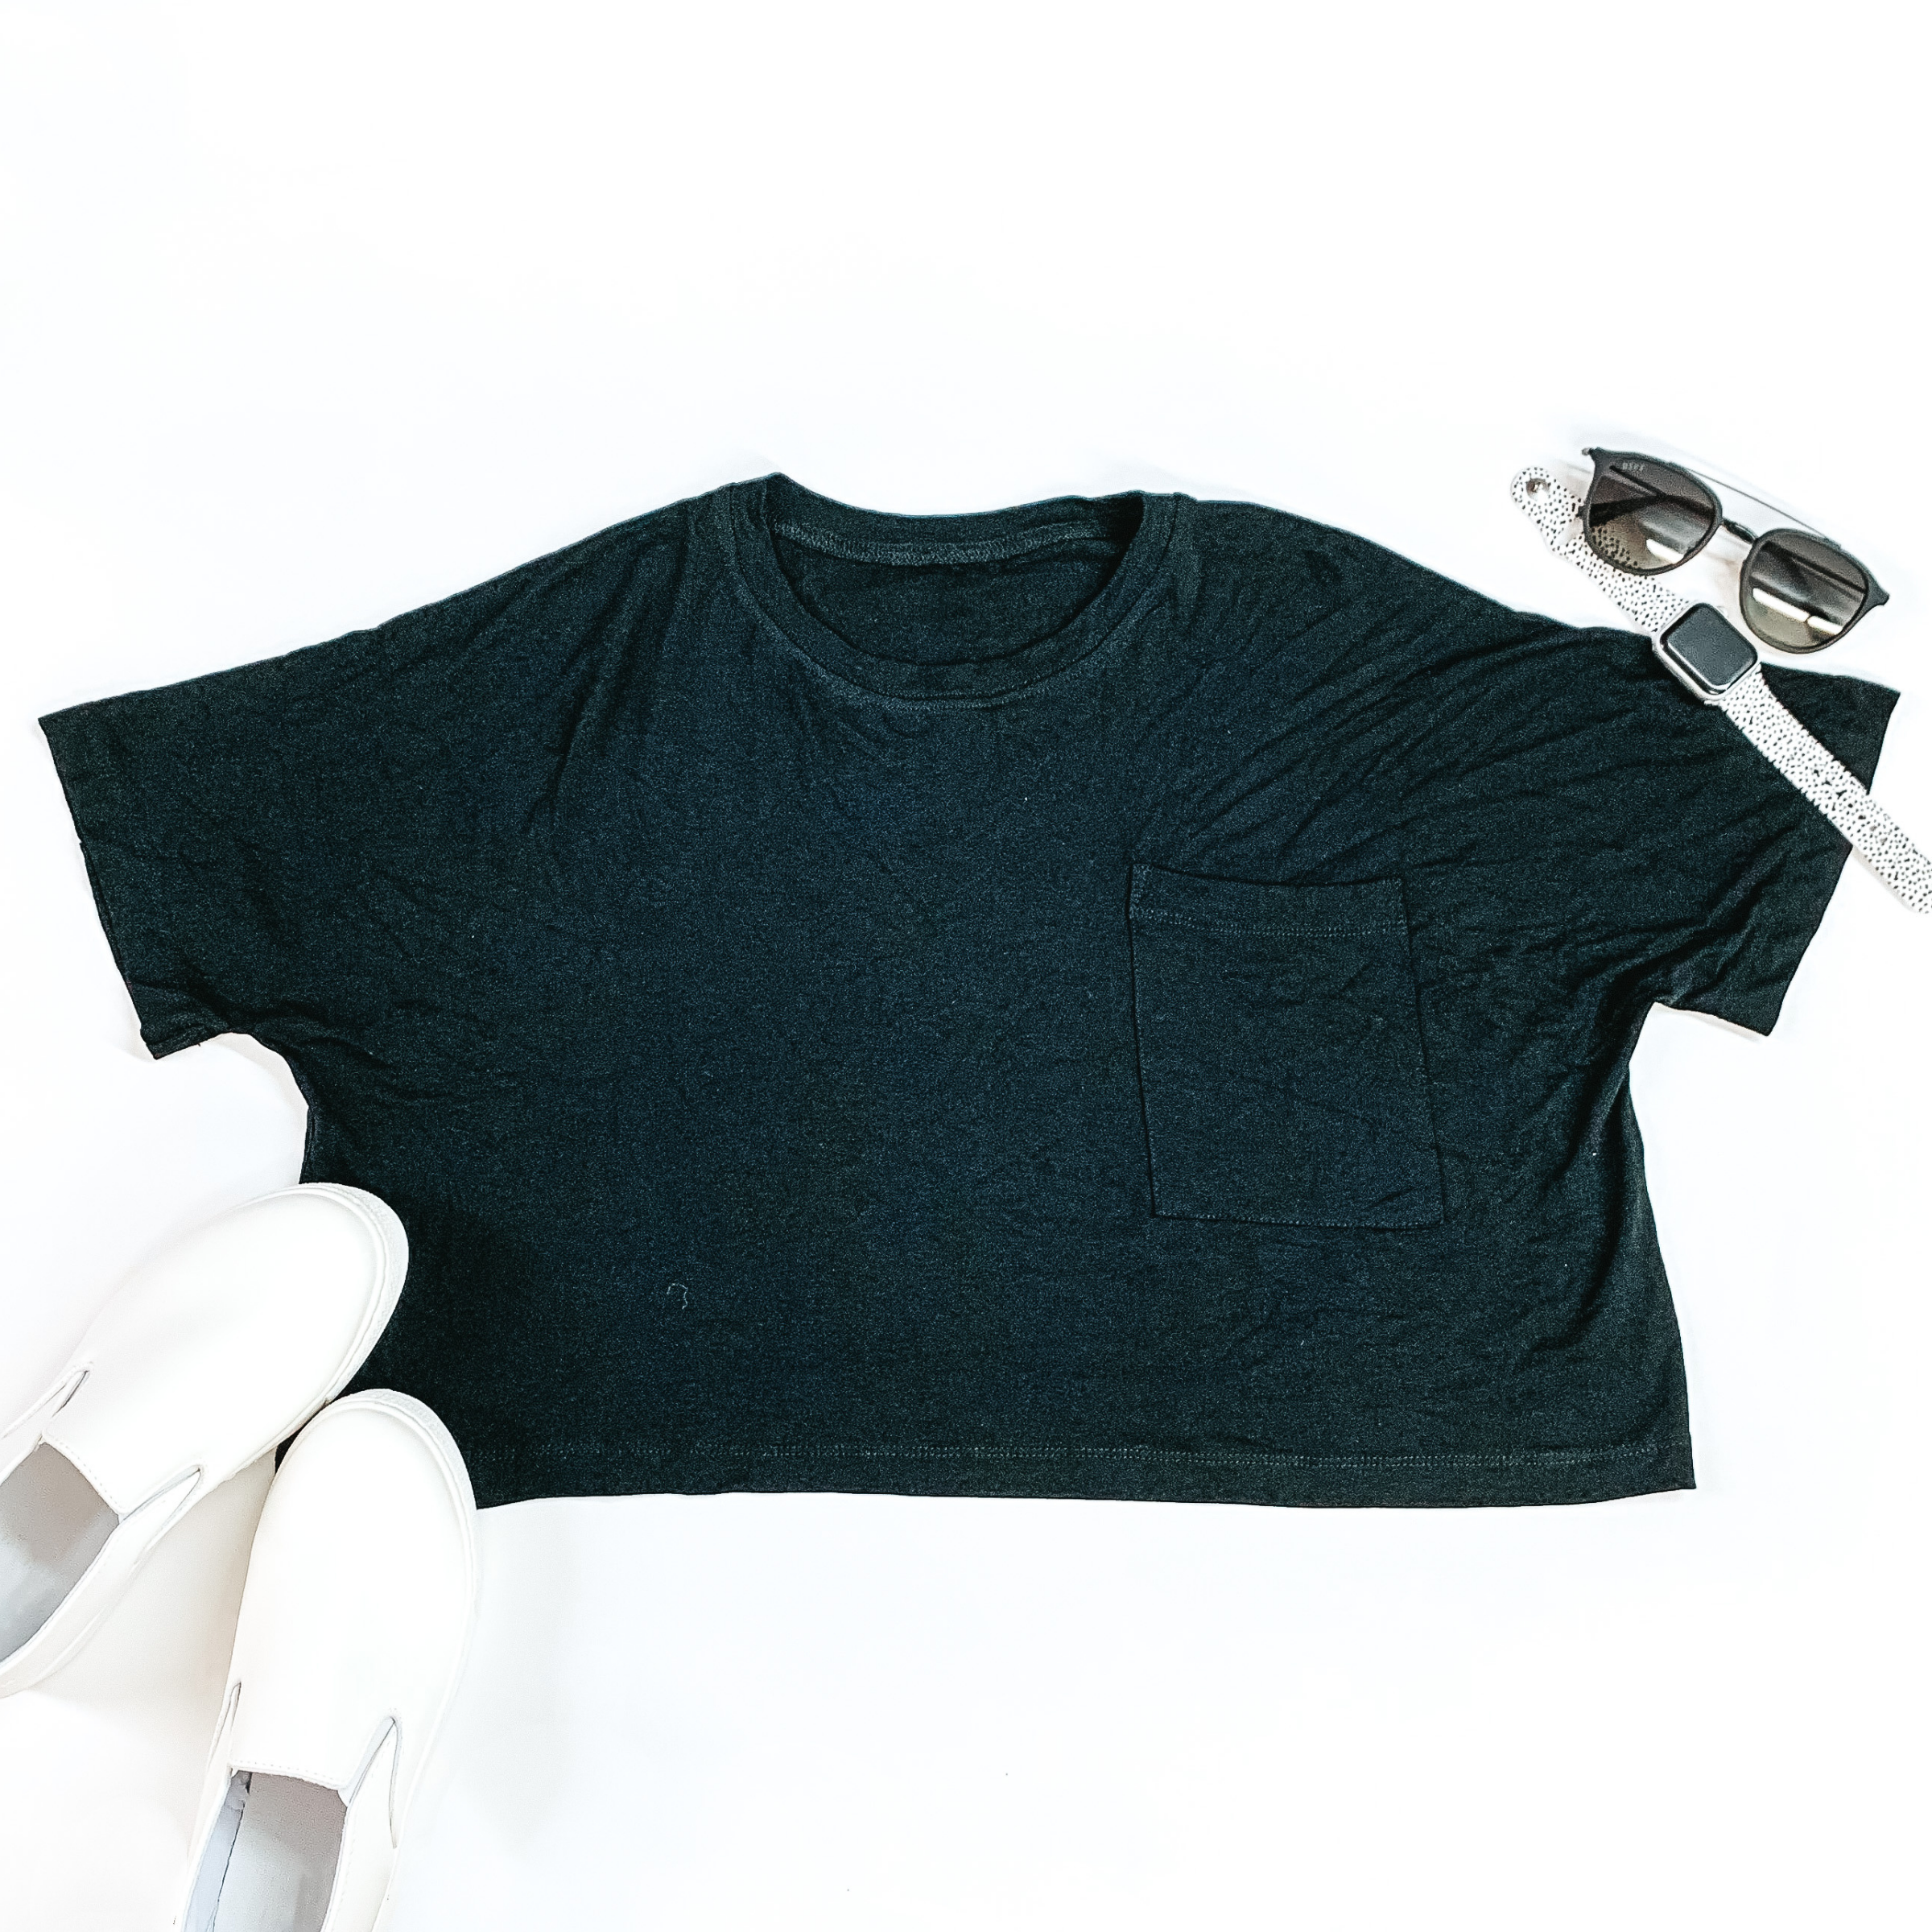 Black cropped short sleeve tee with a front pocket and a scoop neck. This tee is pictured on a white background with with slip on and sunglasses in the picture. 